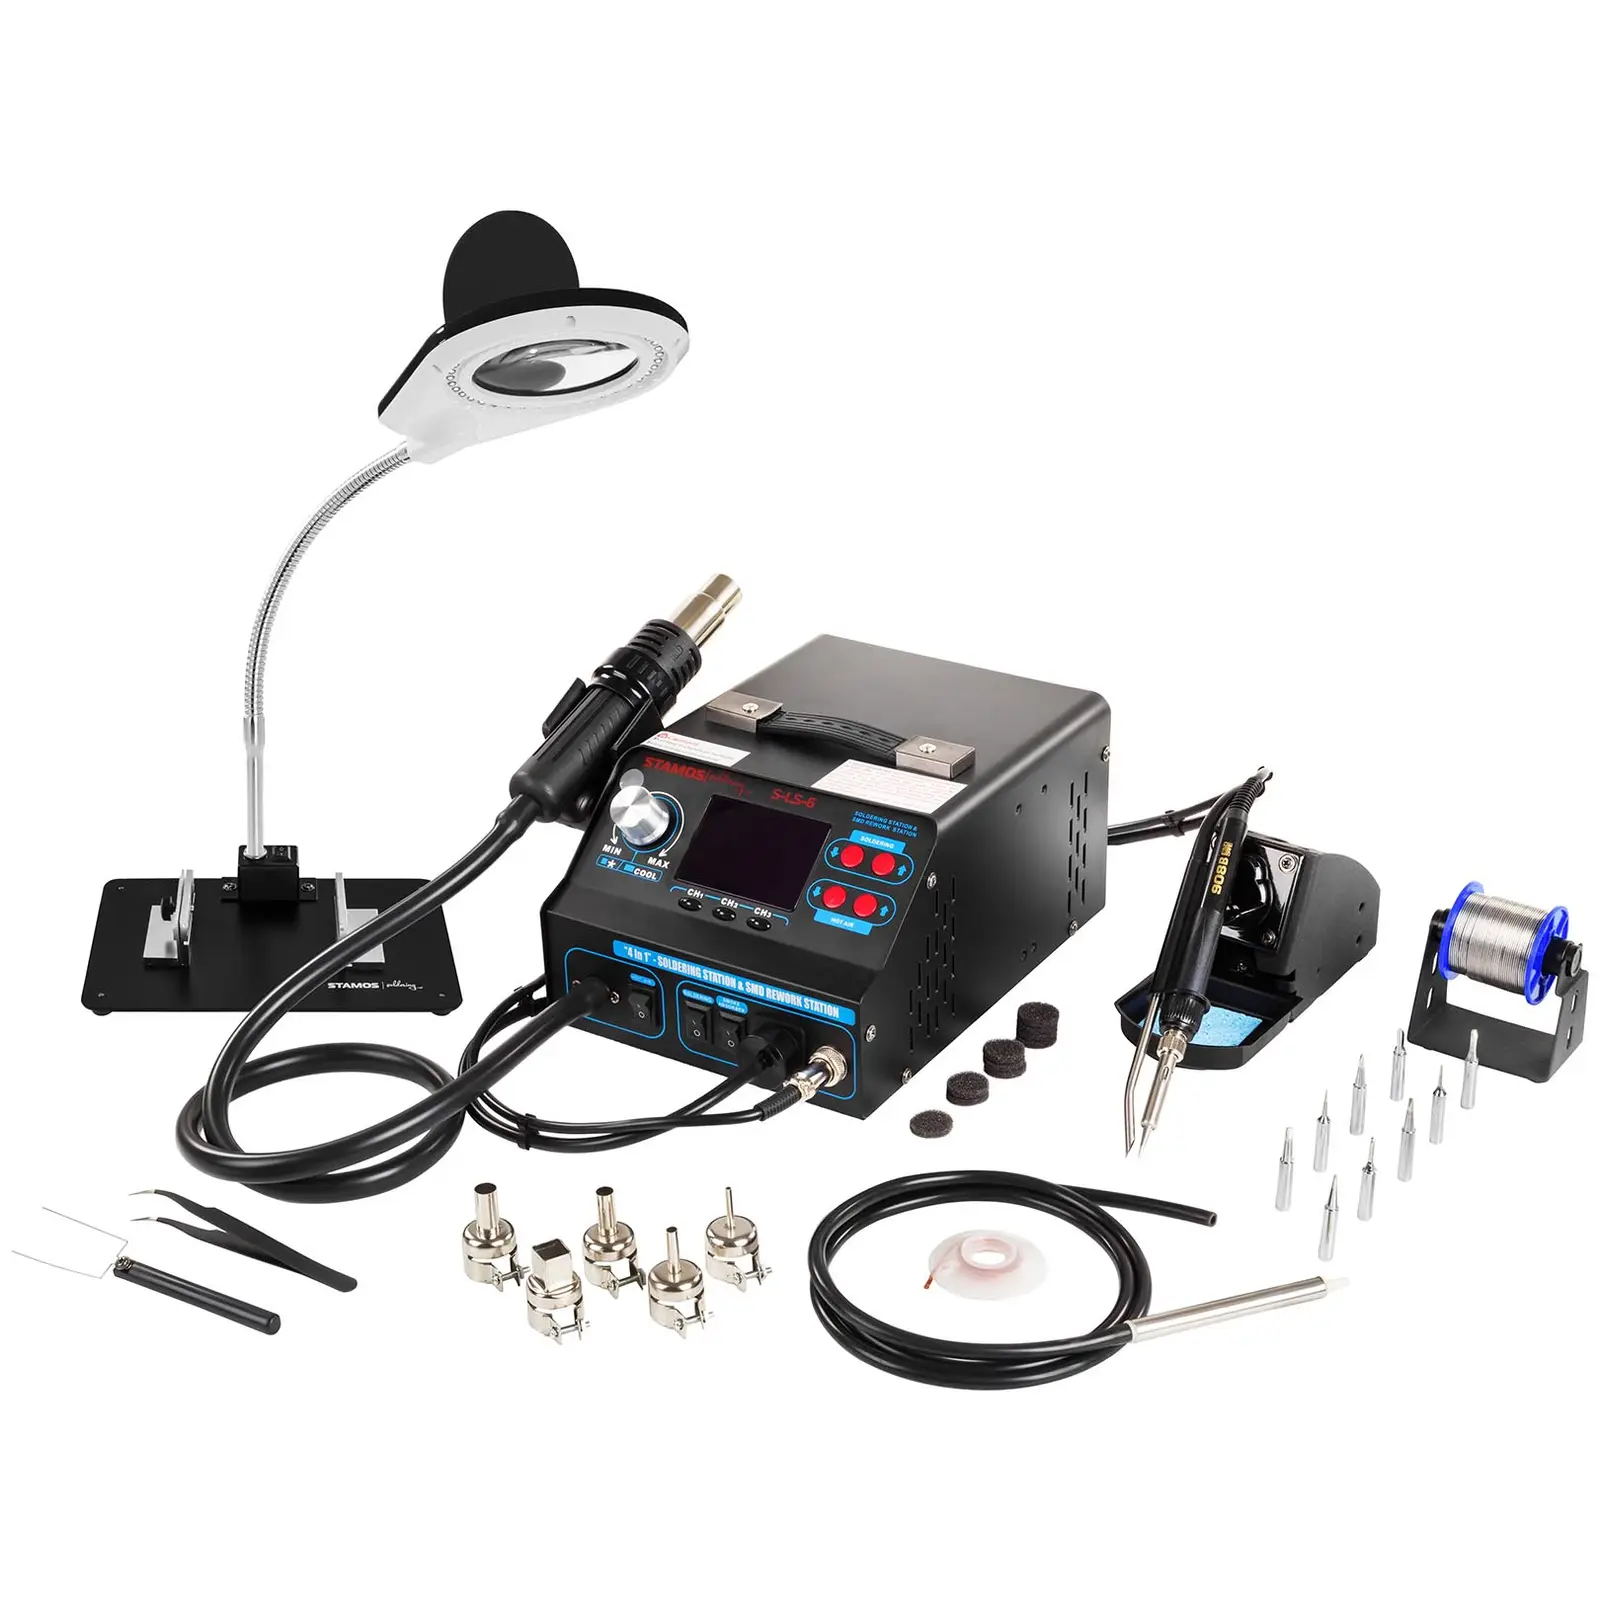 Set Soldering Station with Tin Roller Clamp and Soldering Smoke Vent + Accessoires